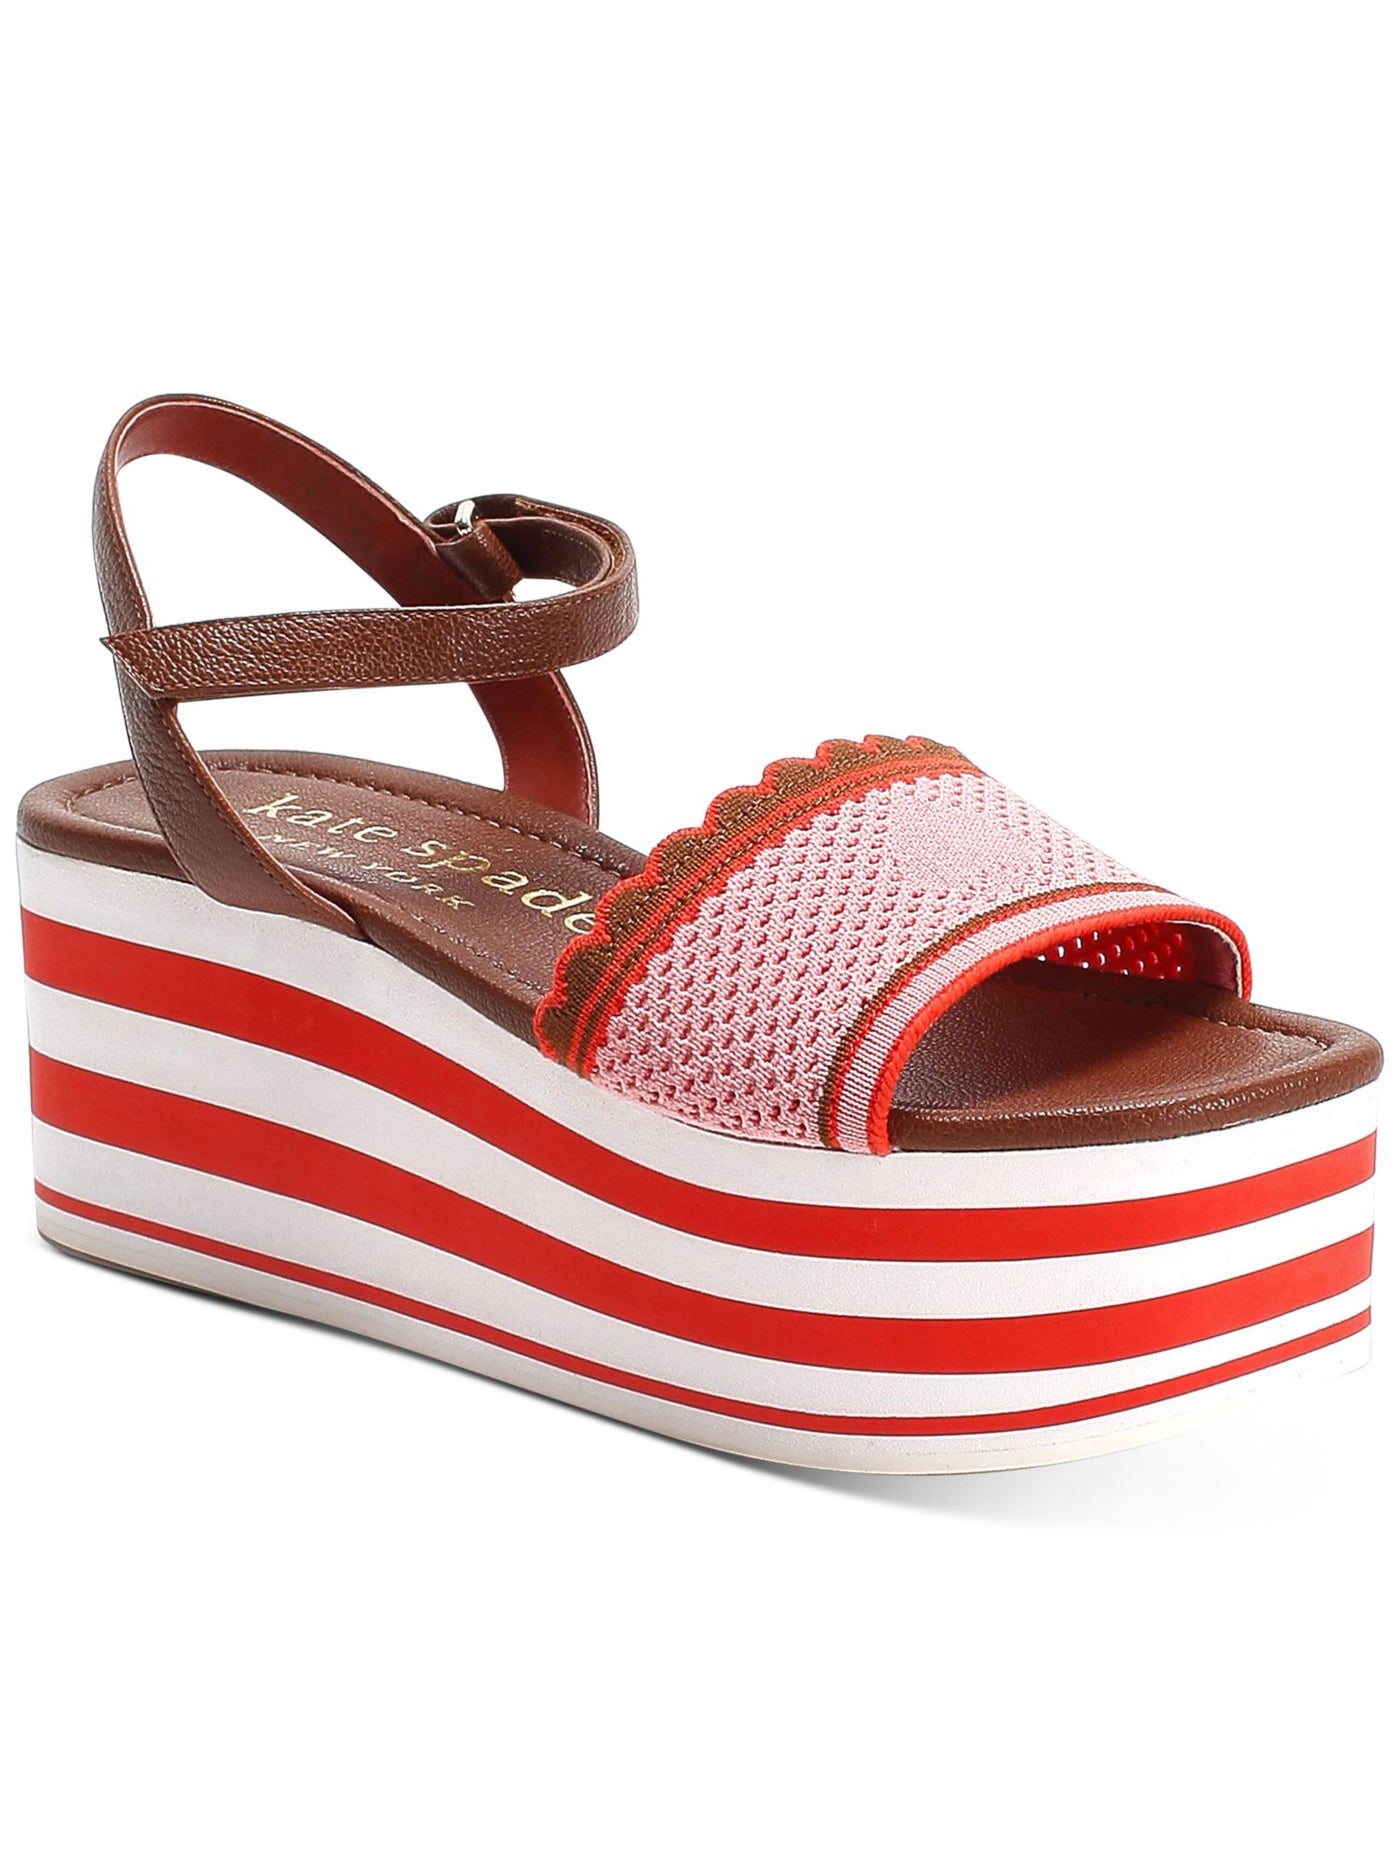 KATE SPADE NEW YORK Womens Red Striped 2" Platform Scalloped Breathable Padded Adjustable Strap Perforated Highrise Spade Square Toe Wedge Slingback Sandal 8 B